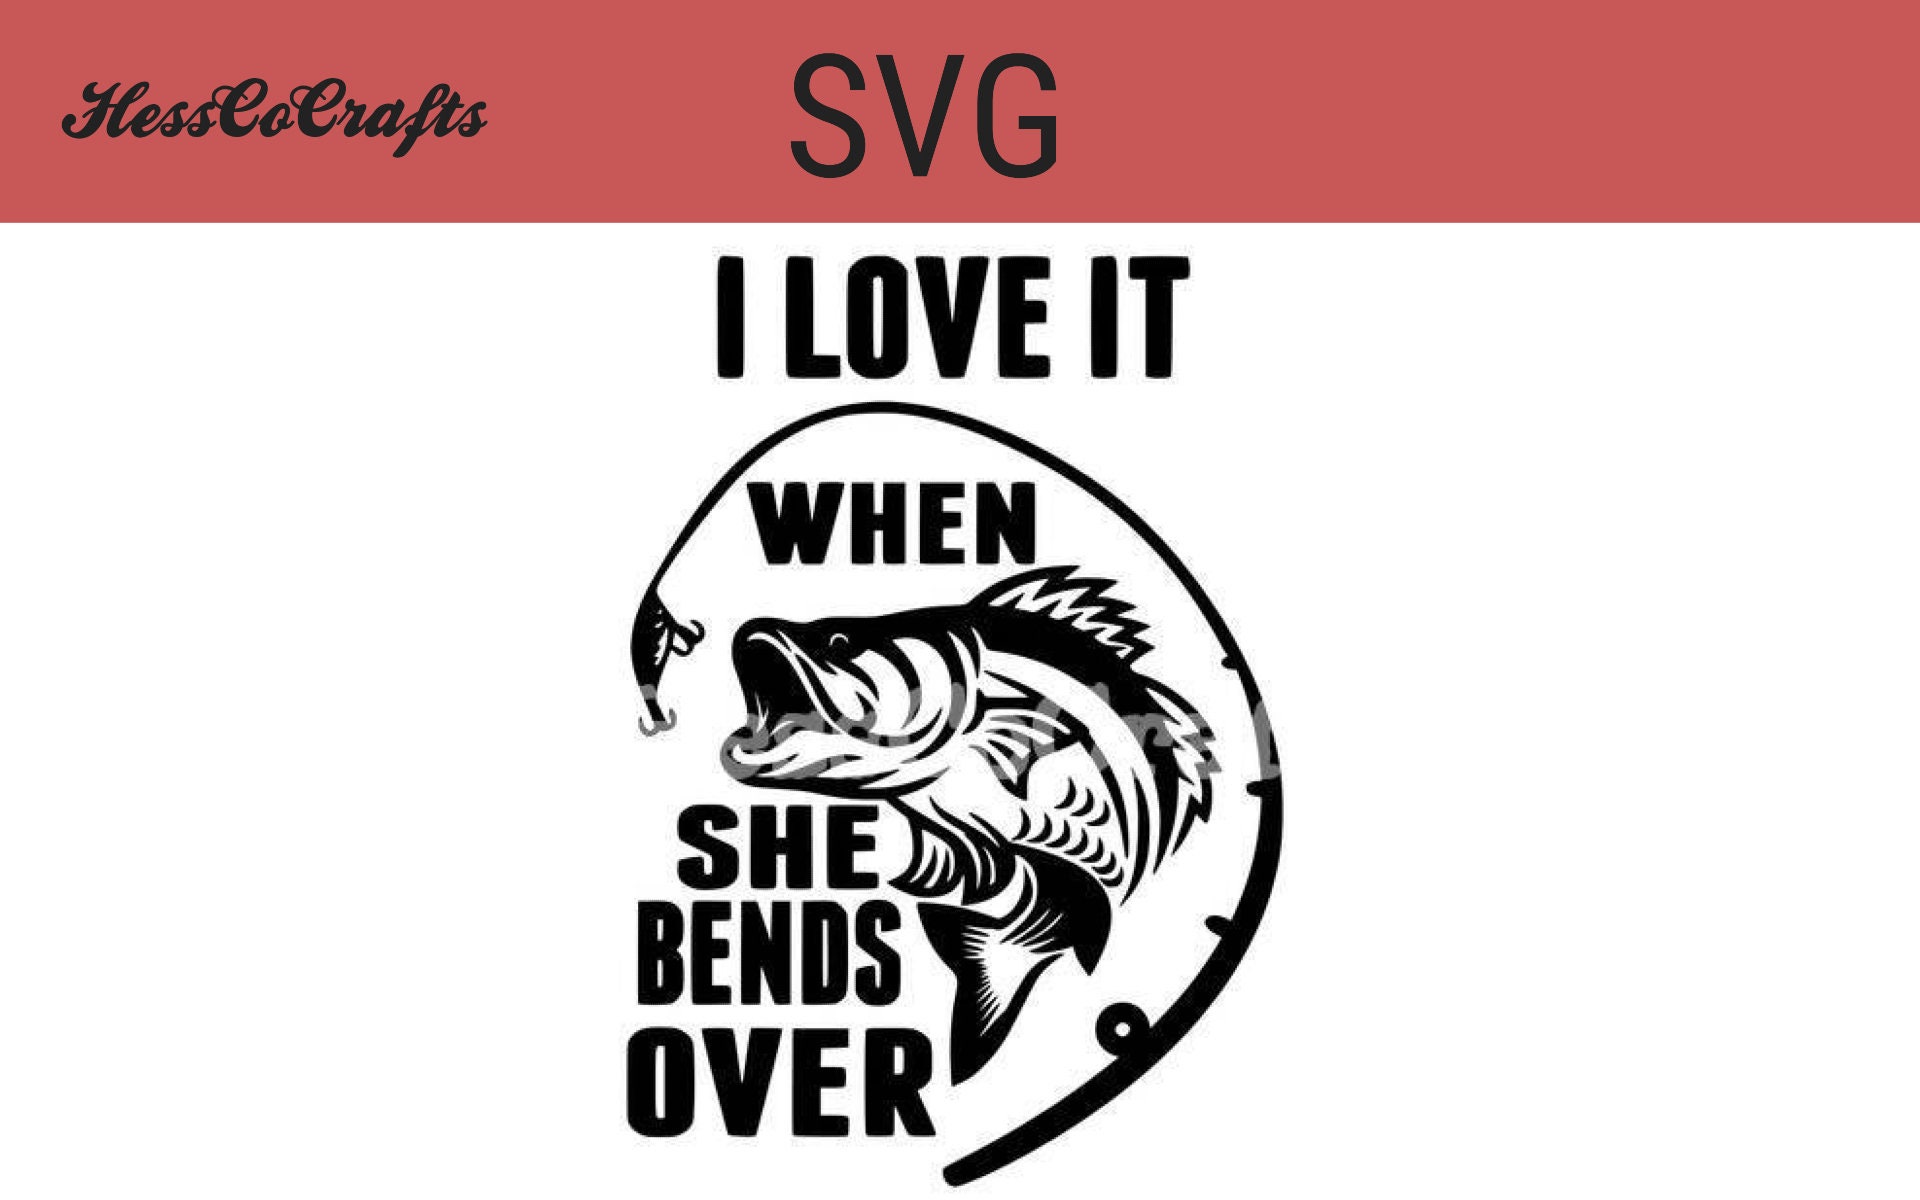 I Love It When She Bends Over - Funny Fishing, Car, Van Decal Stickers